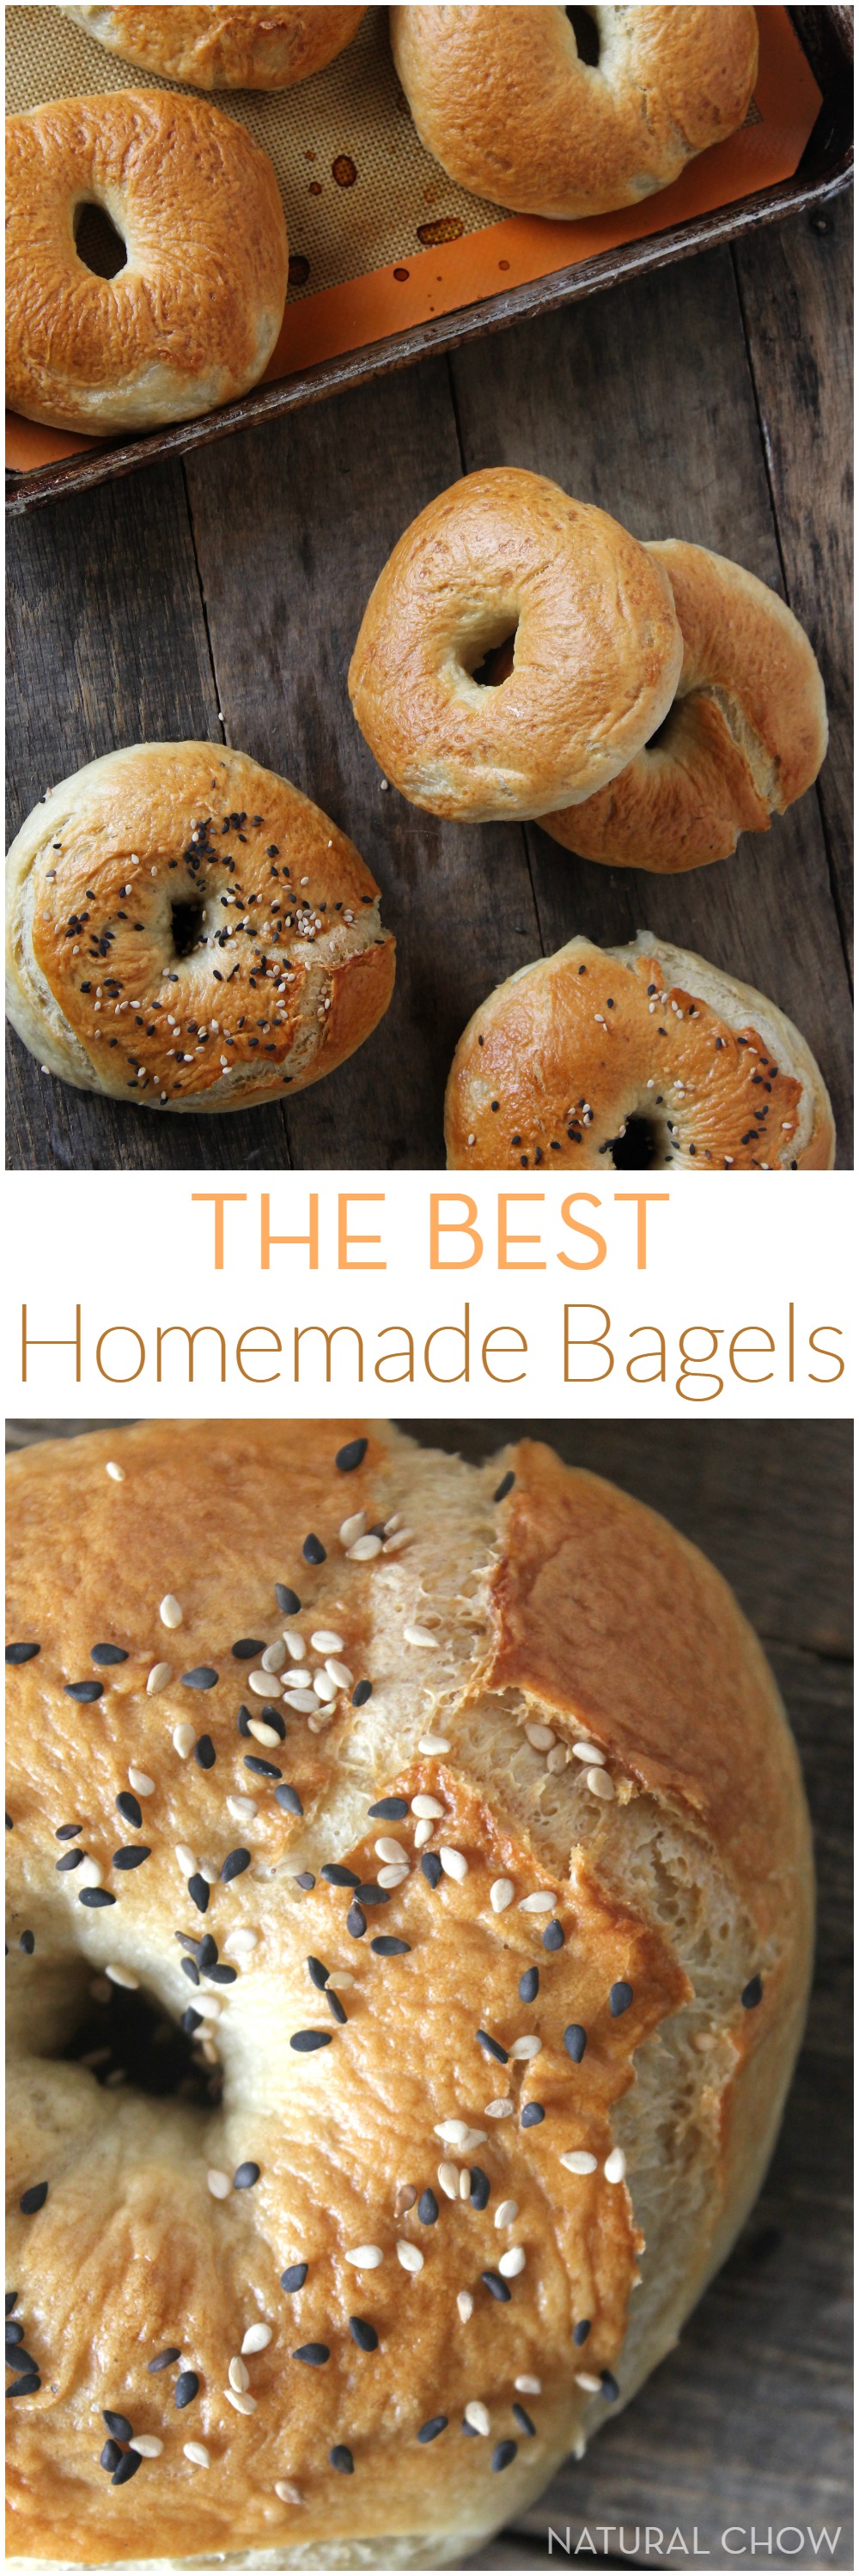 The BEST Homemade Bagels | Made with only 8 ingredients, these homemade bagels are easy to make and taste heavenly. They're of much higher quality than the store bought kind and are also way cheaper!